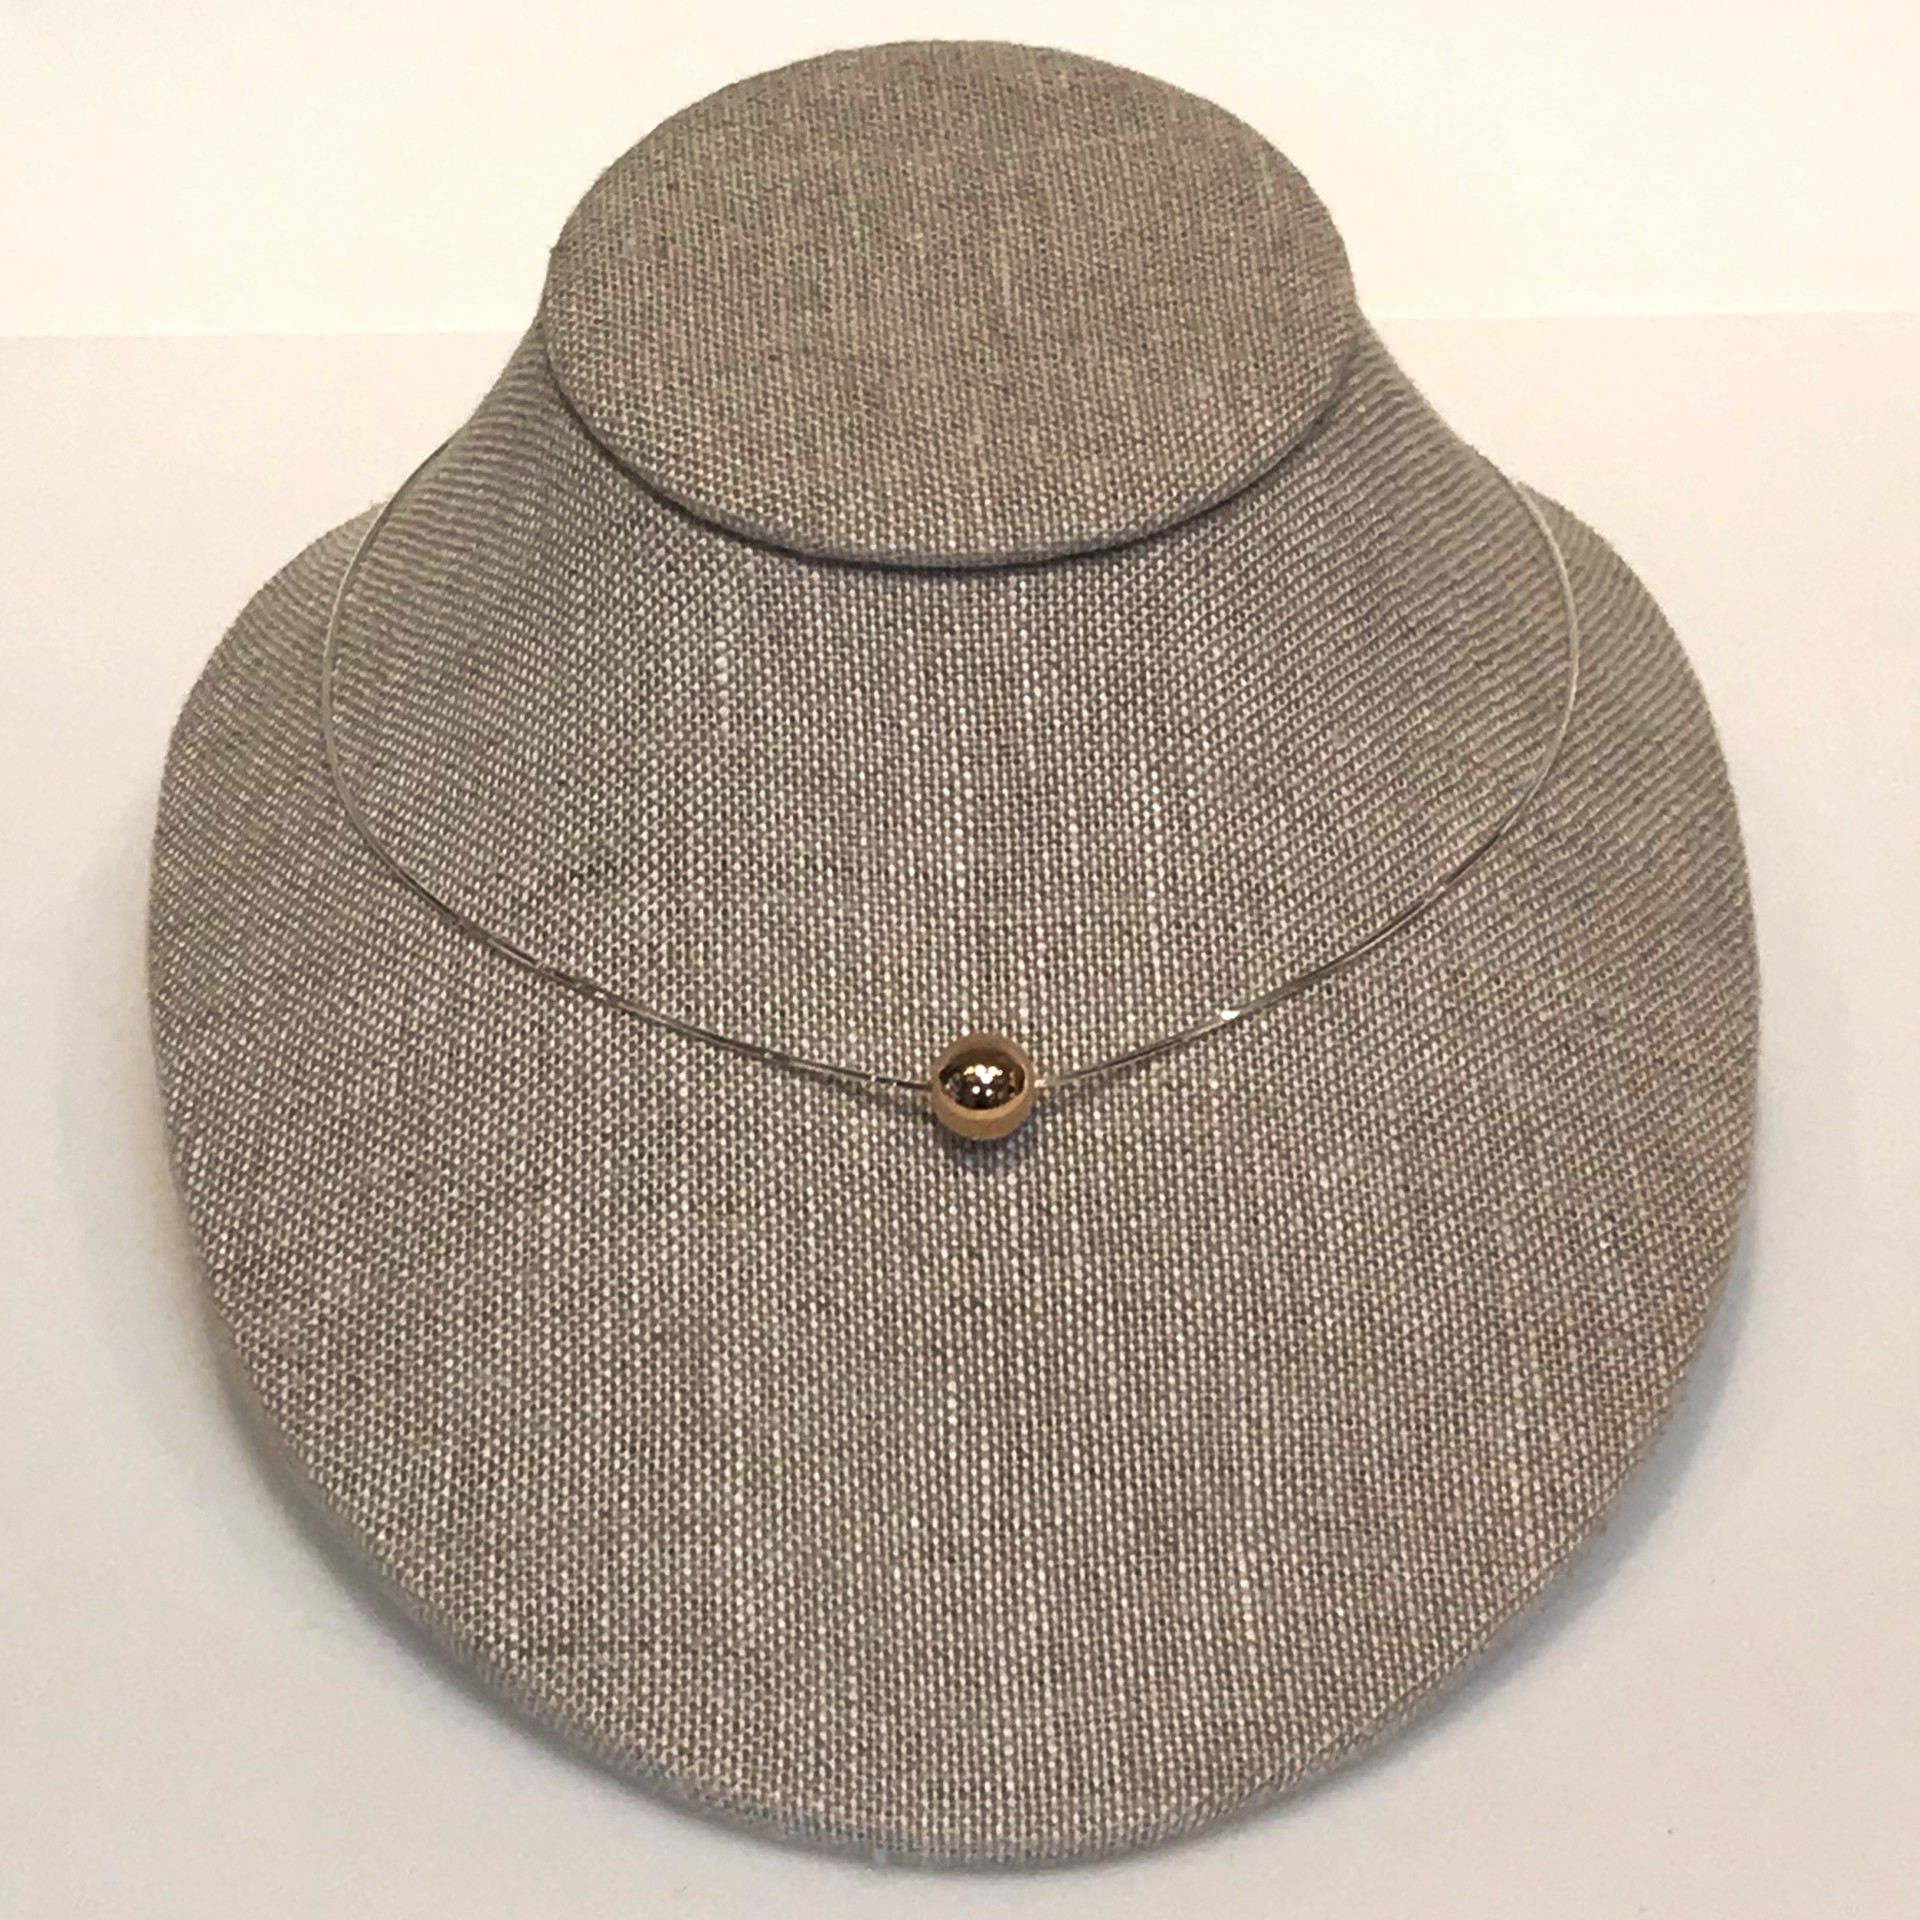 16" Eunity Necklace with Gold Plated Sterling Silver Bead by Suzanne Woodworth